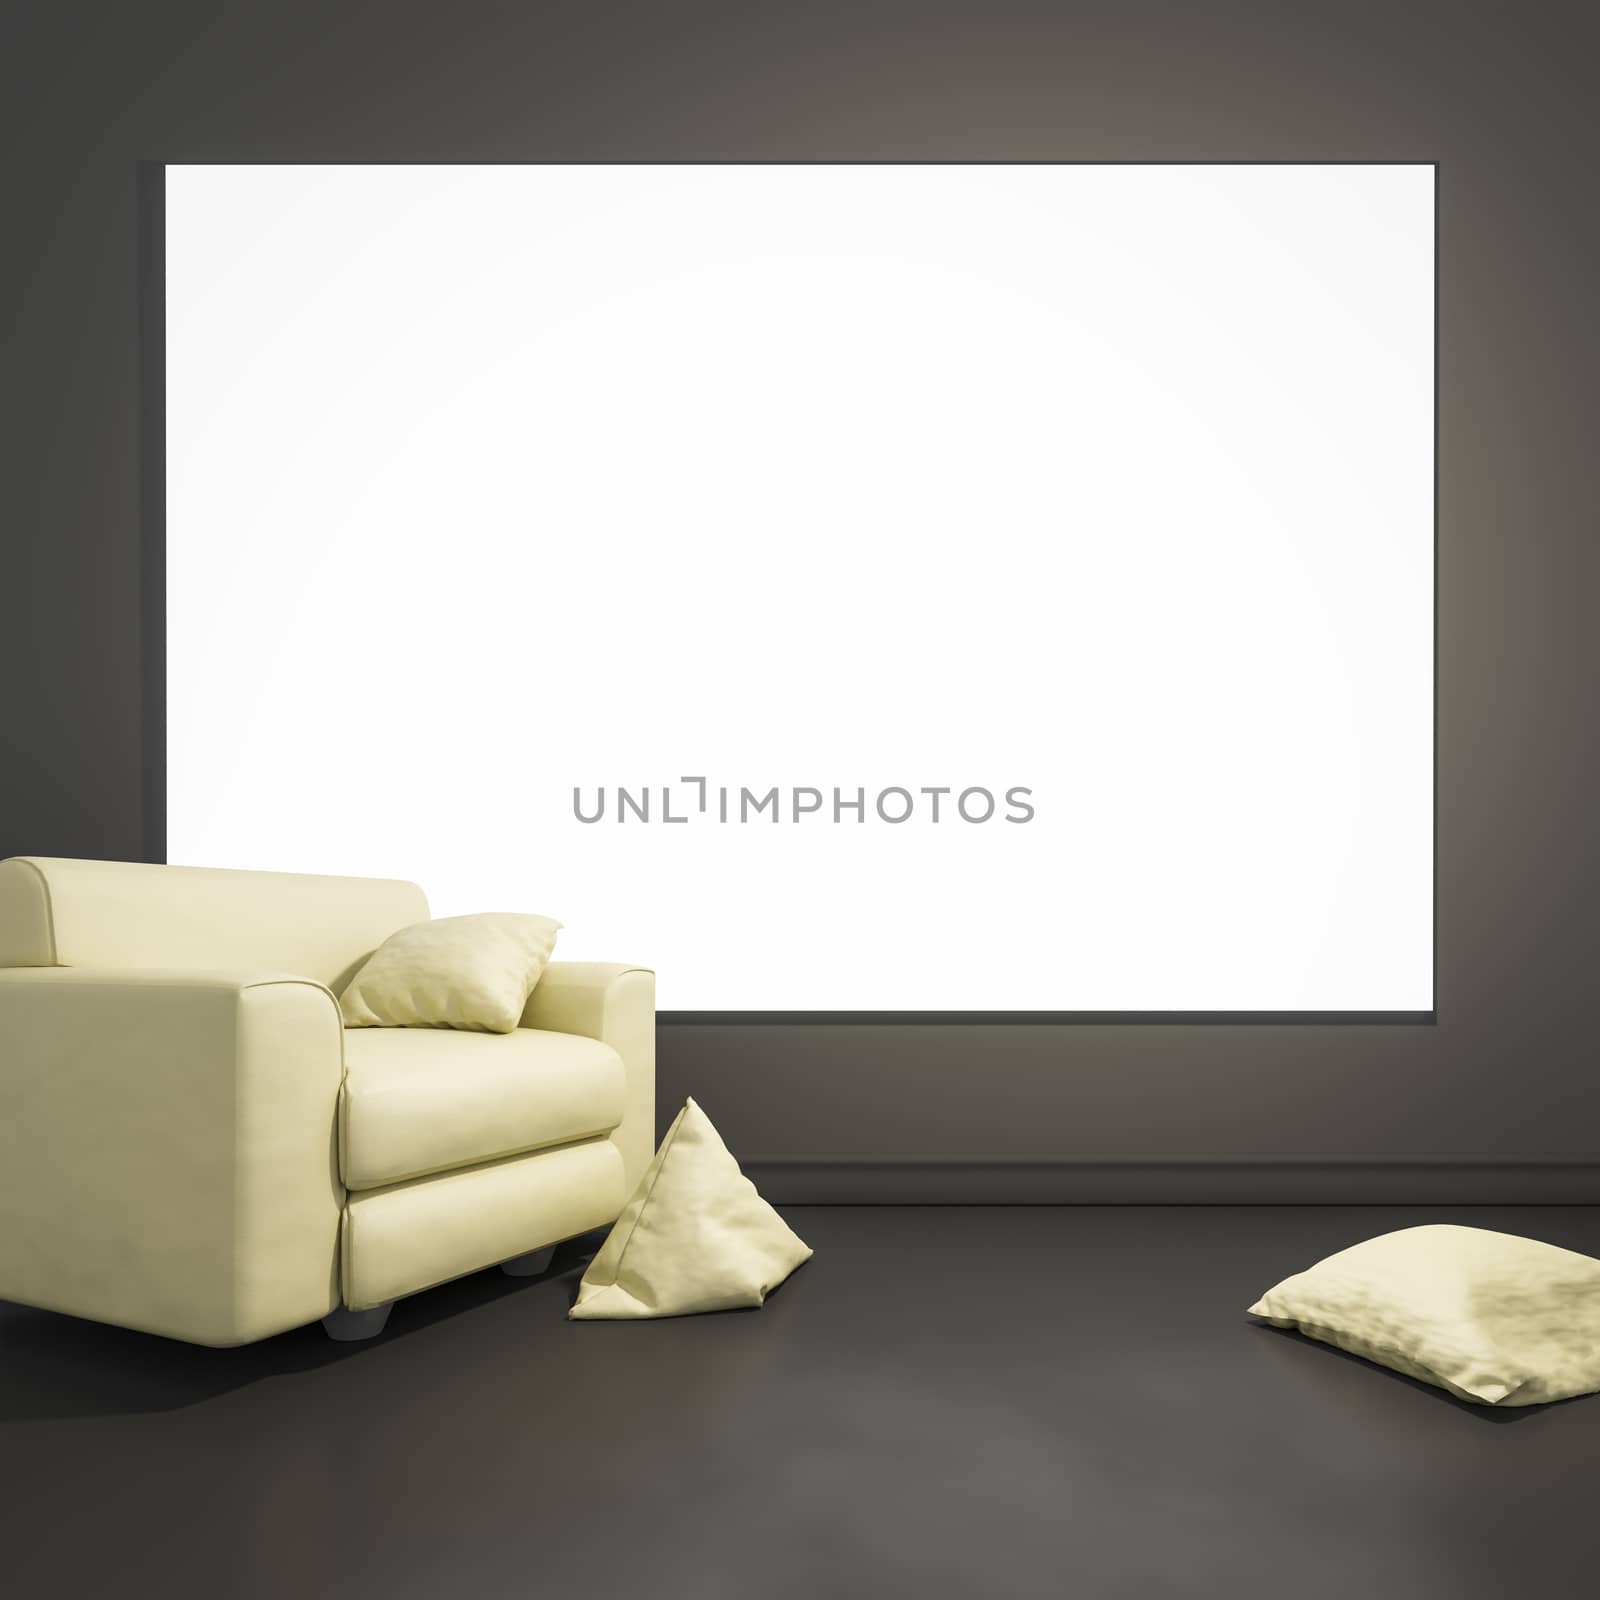 3d rendering of an armchair with pillows and a blank frame for your content